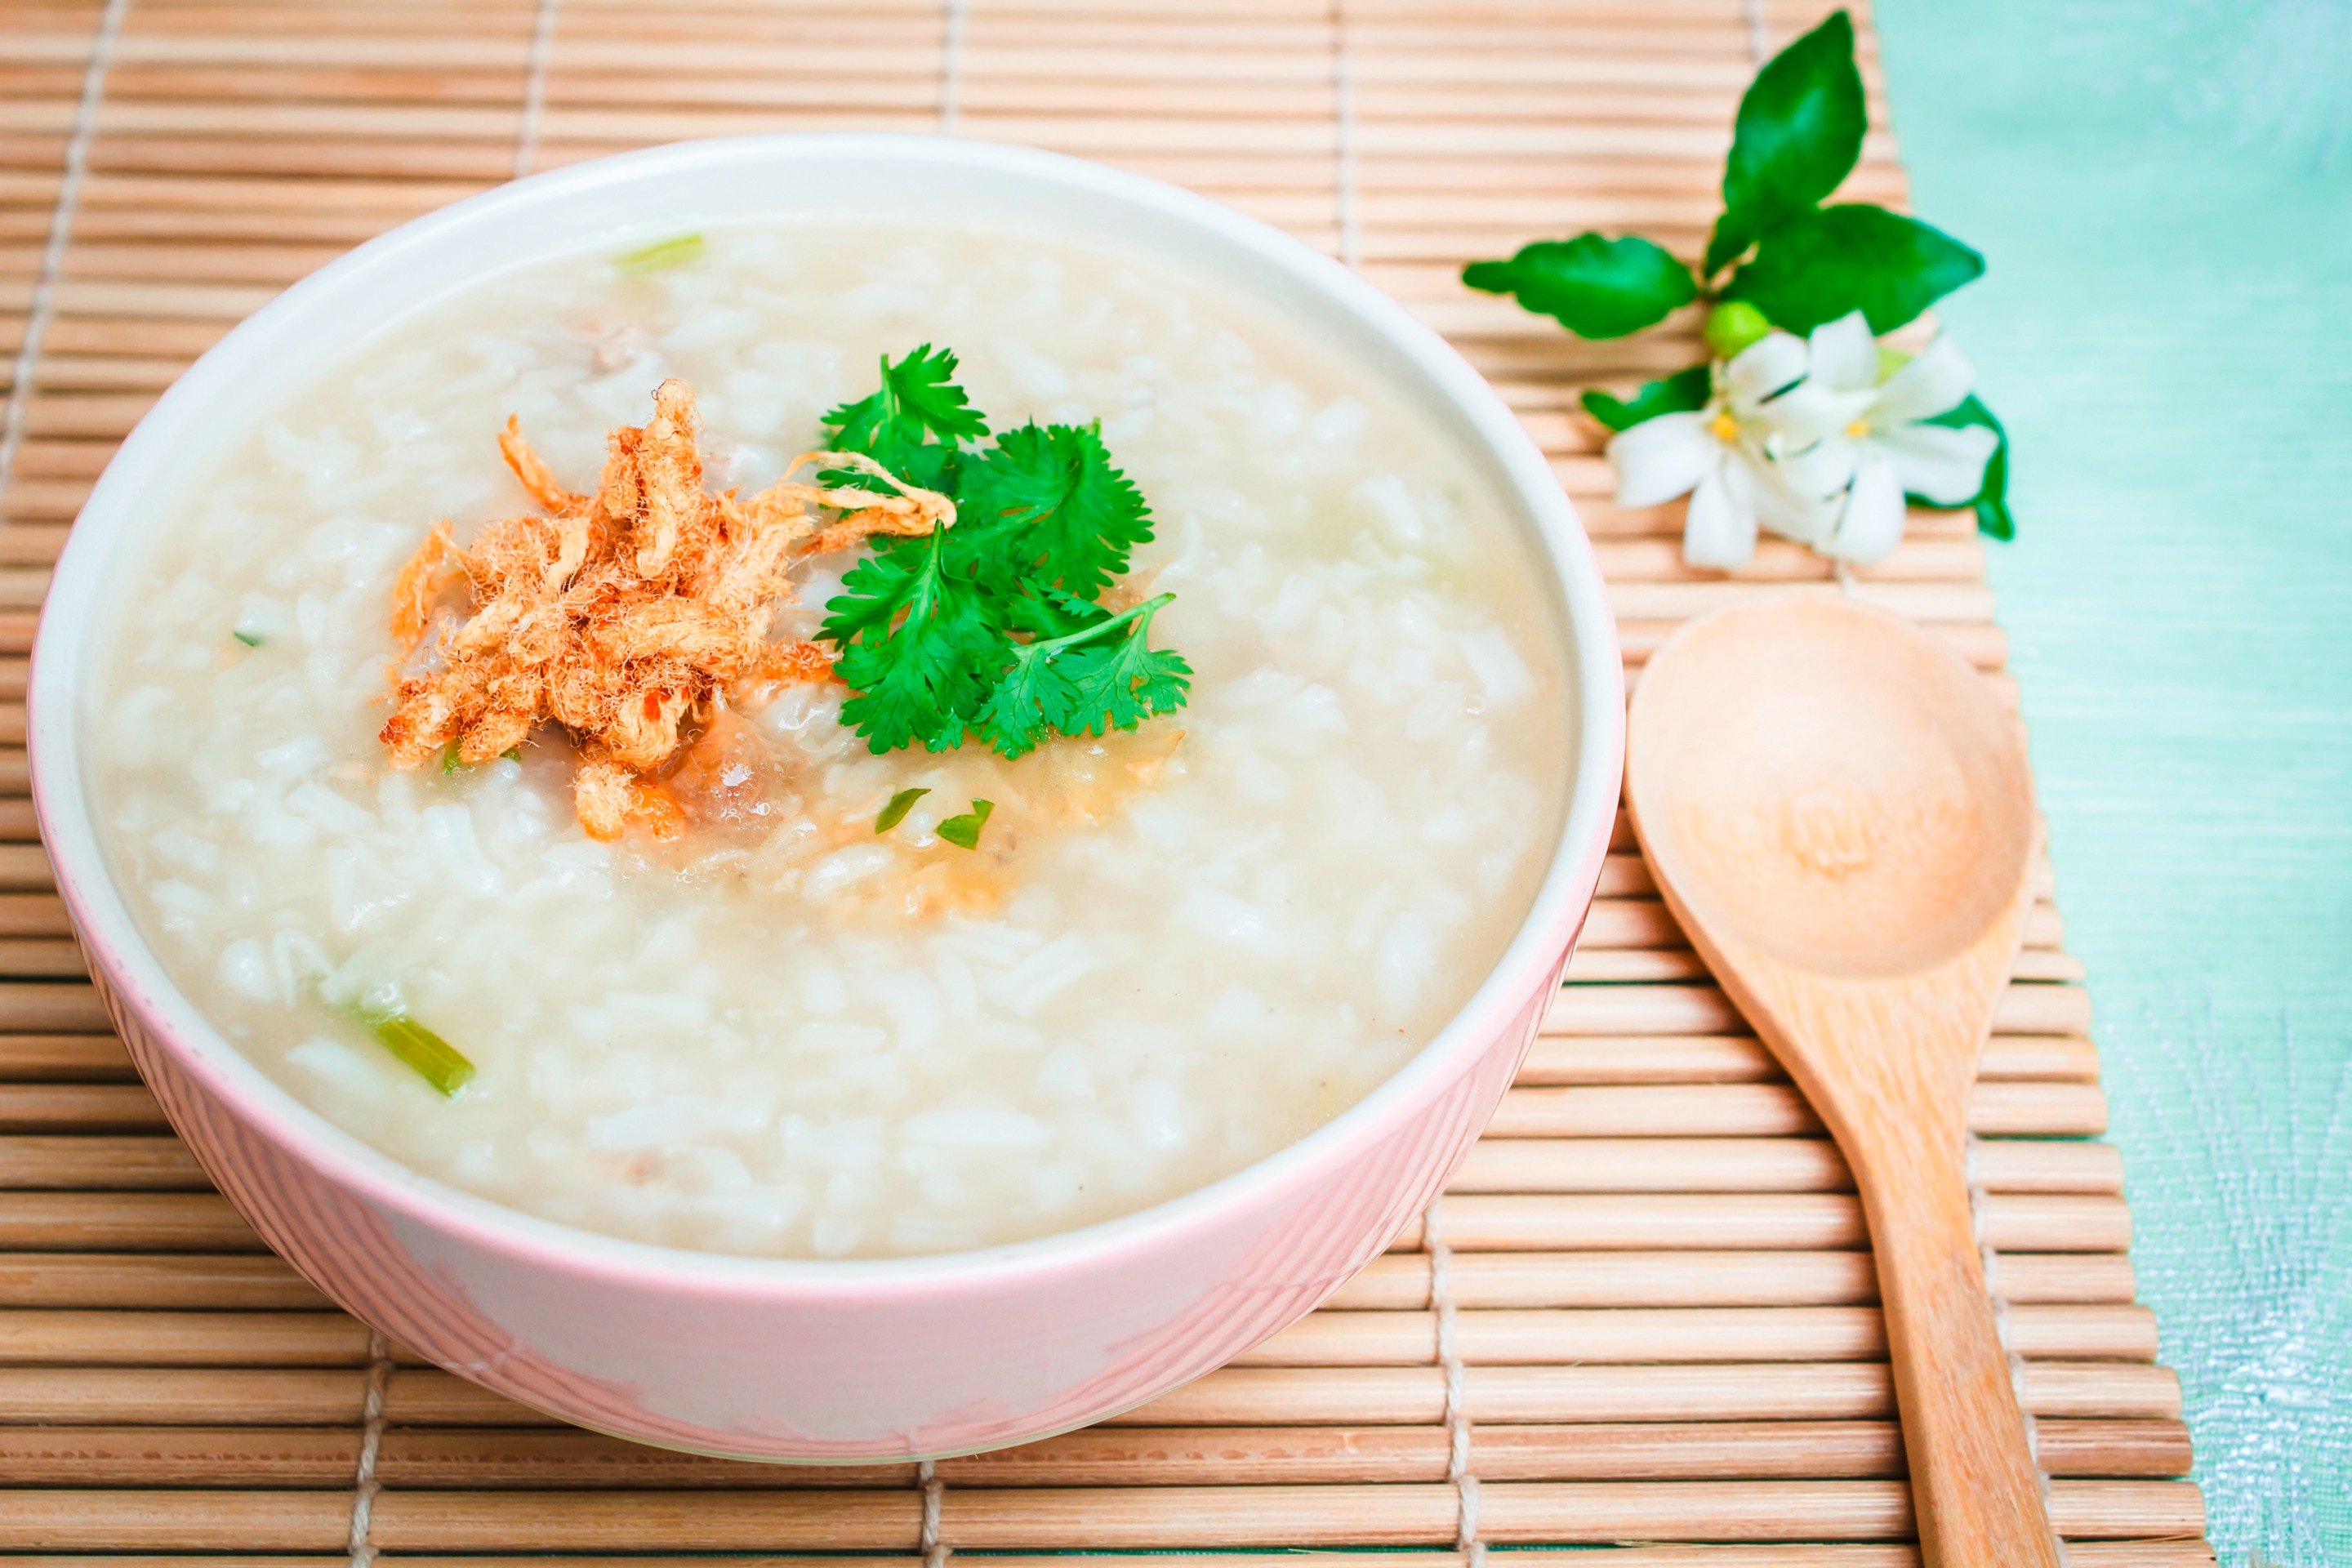 A simple serving of porridge flavored with shredded dried pork